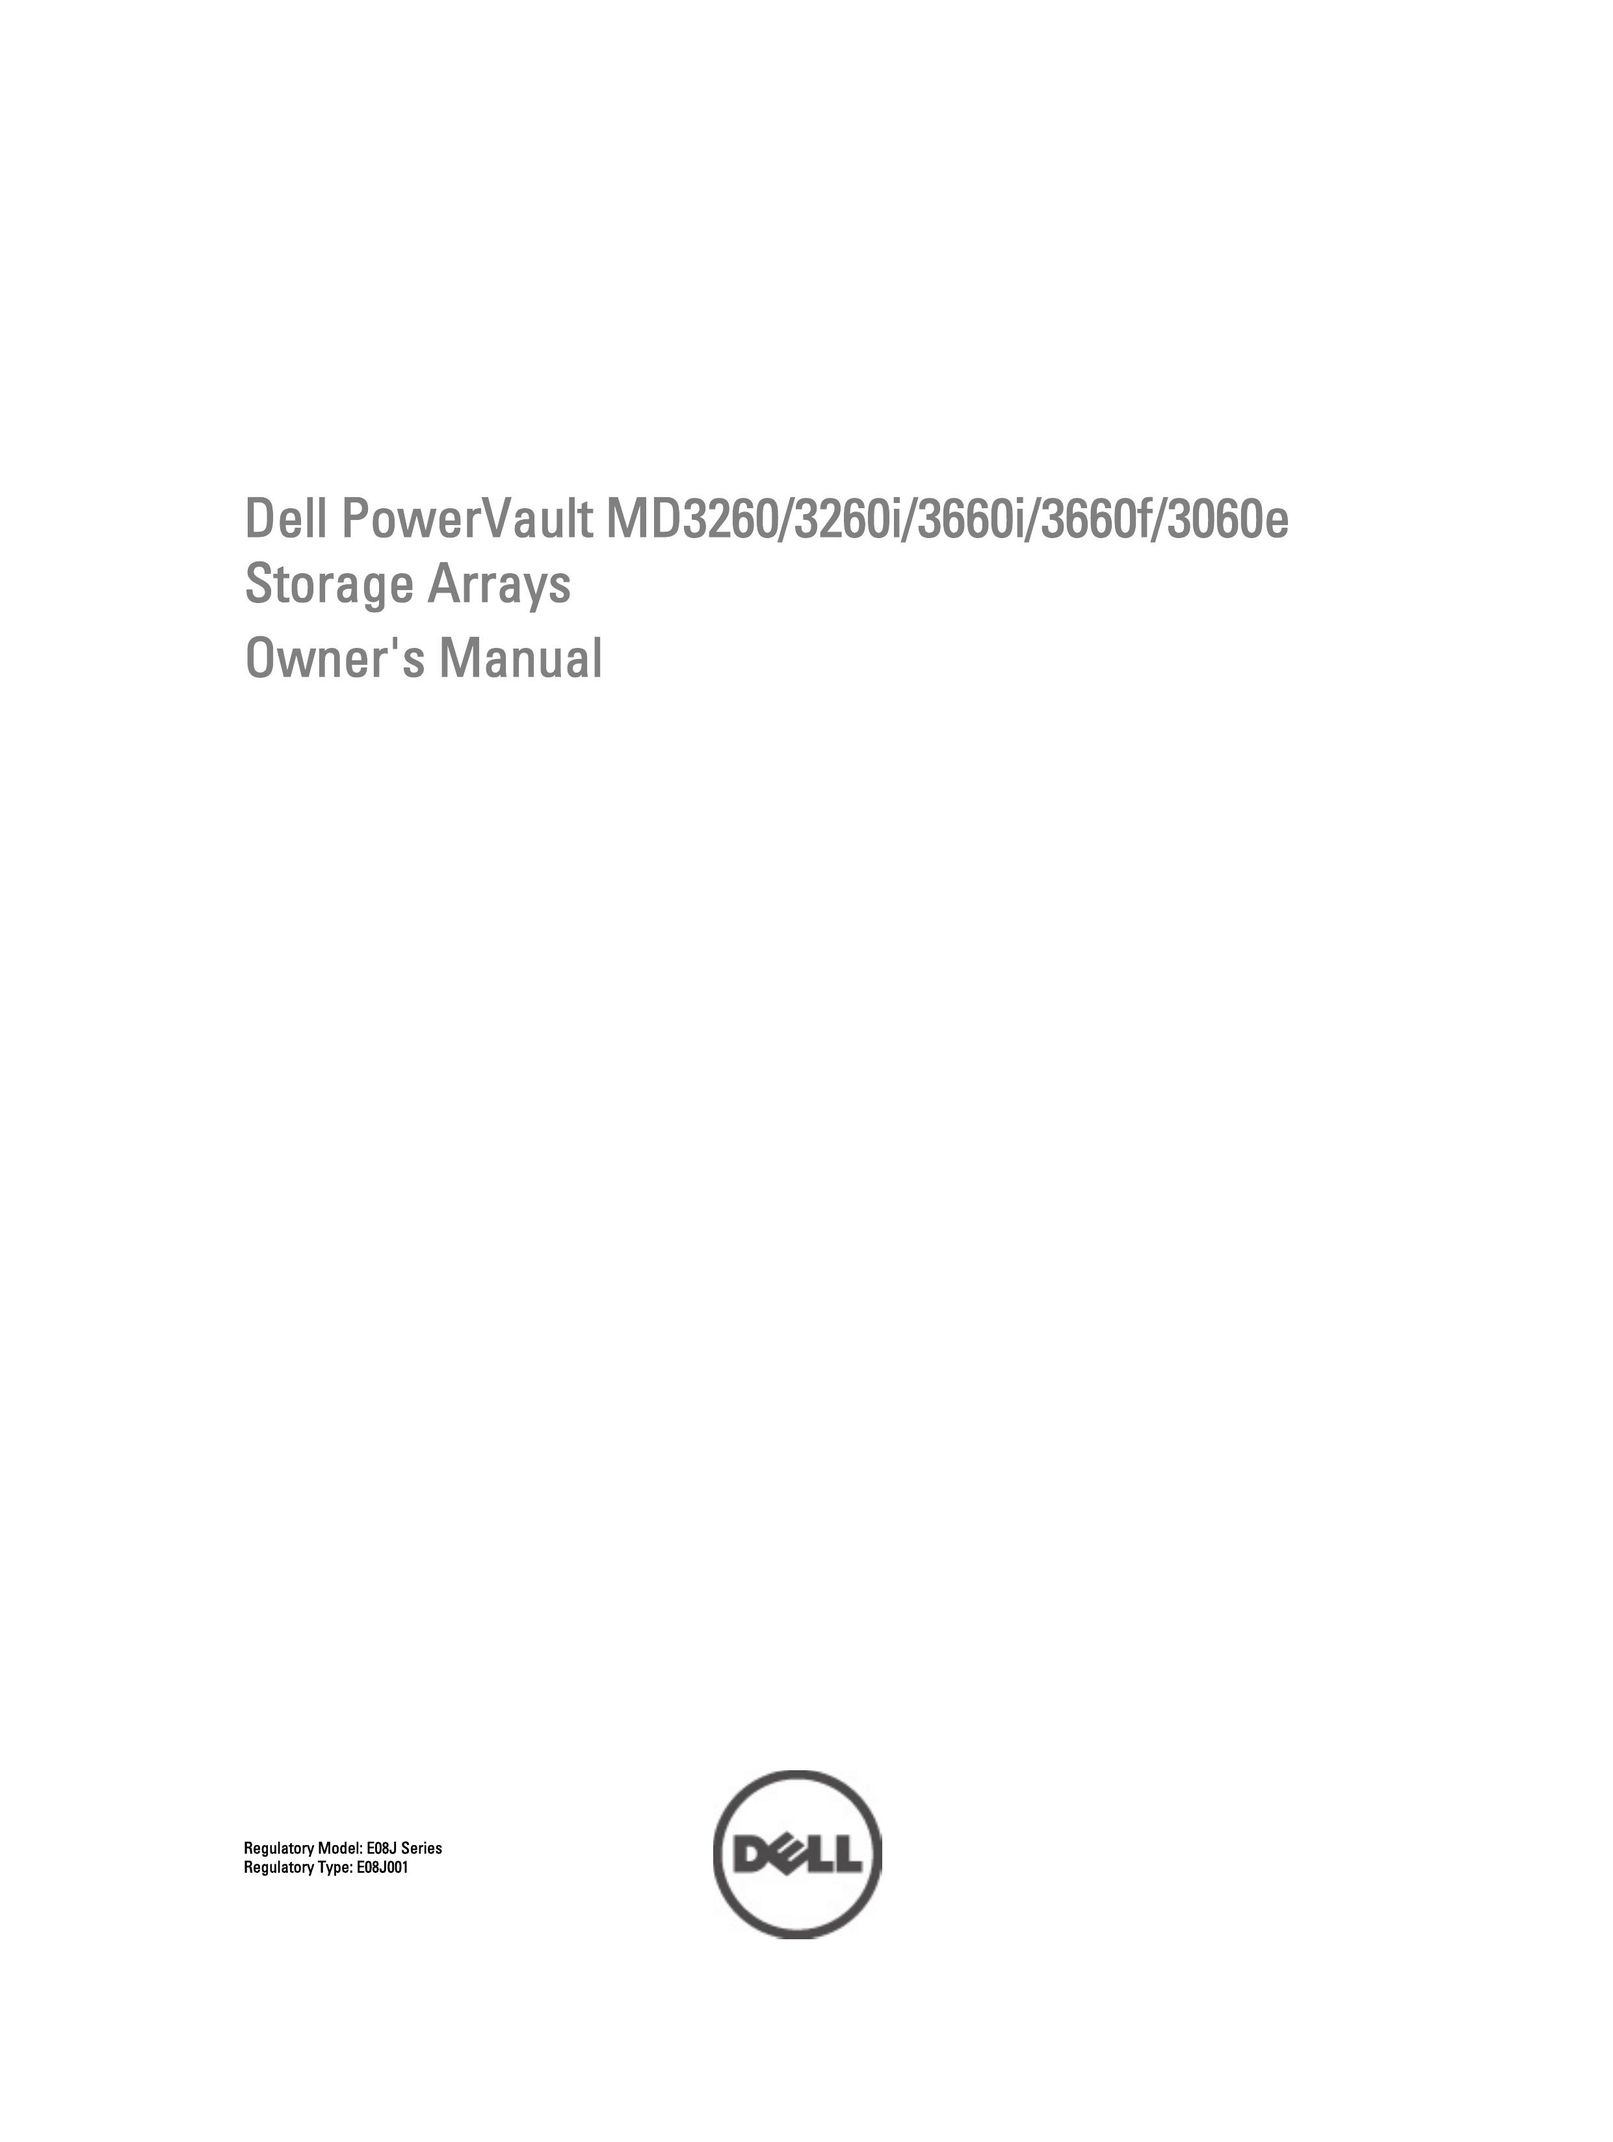 Dell MD3260 Tool Storage User Manual